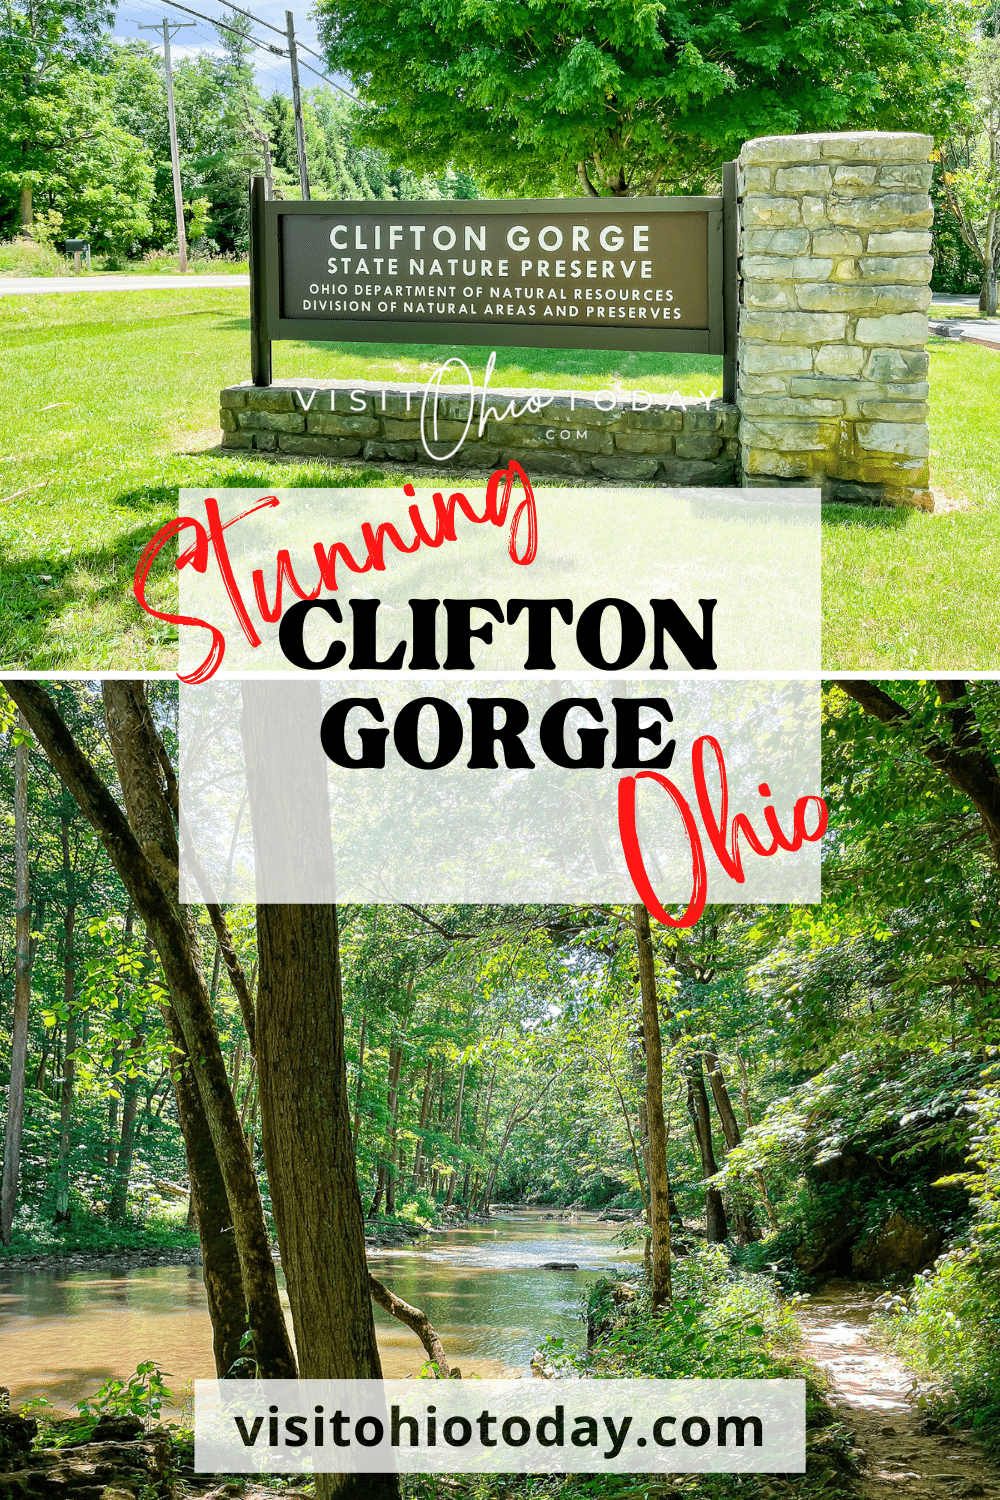 Clifton Gorge State Nature Preserve is a stunning area of countryside that contains one of the most spectacular dolomite and limestone gorges in Ohio. Clifton Gorge is a 2-mile area of the Little Miami State and National Scenic Rivers. Here you will find an array of spring and summer wildflowers and this is also a birding hotspot.